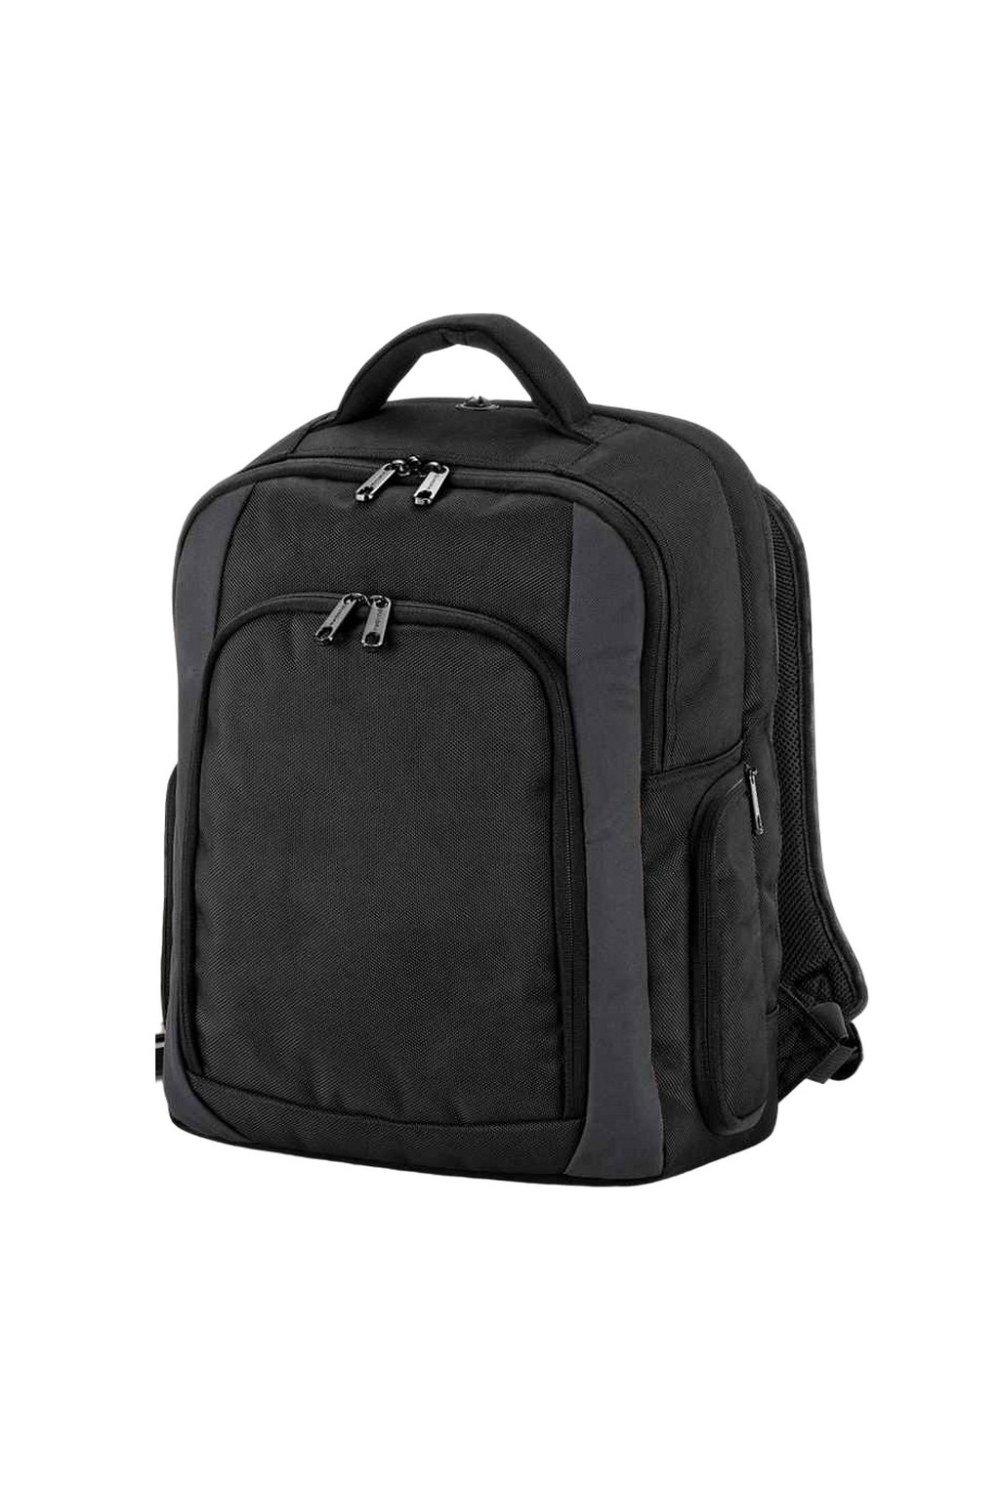 Tungsten Backpack